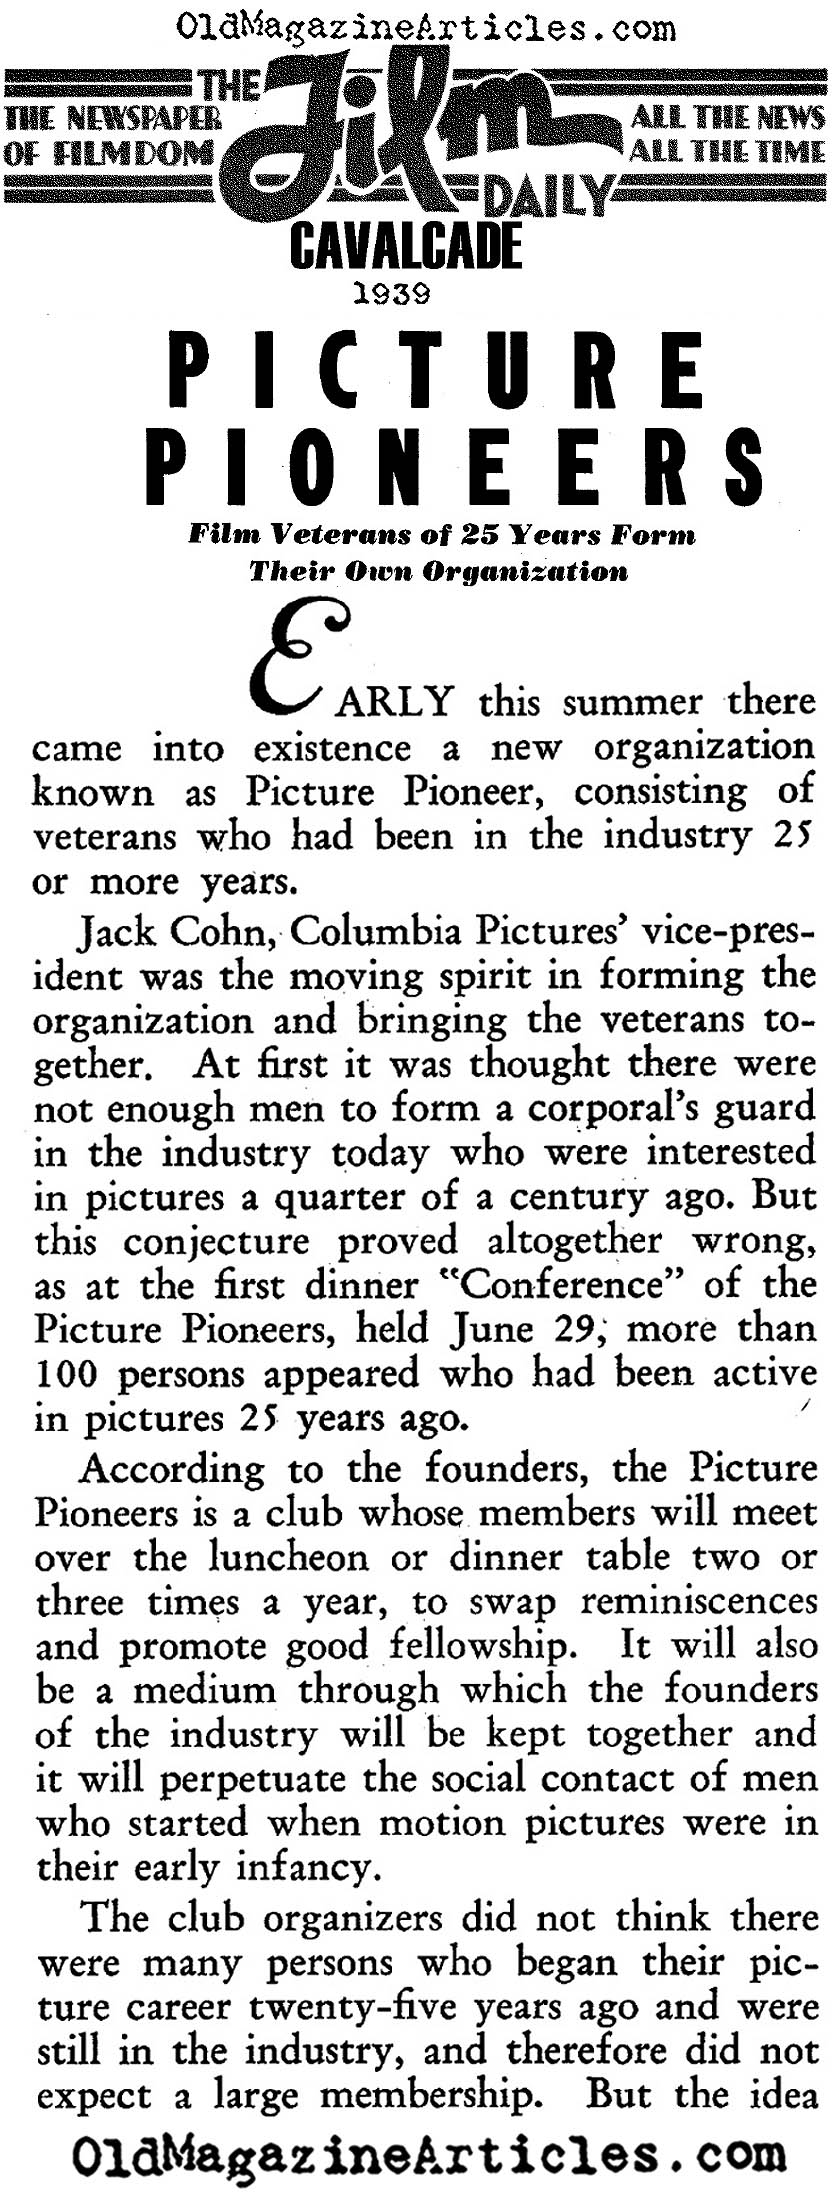 The Founders of the Hollywood Film Colony Gather Together<BR>(Film Daily, 1939)